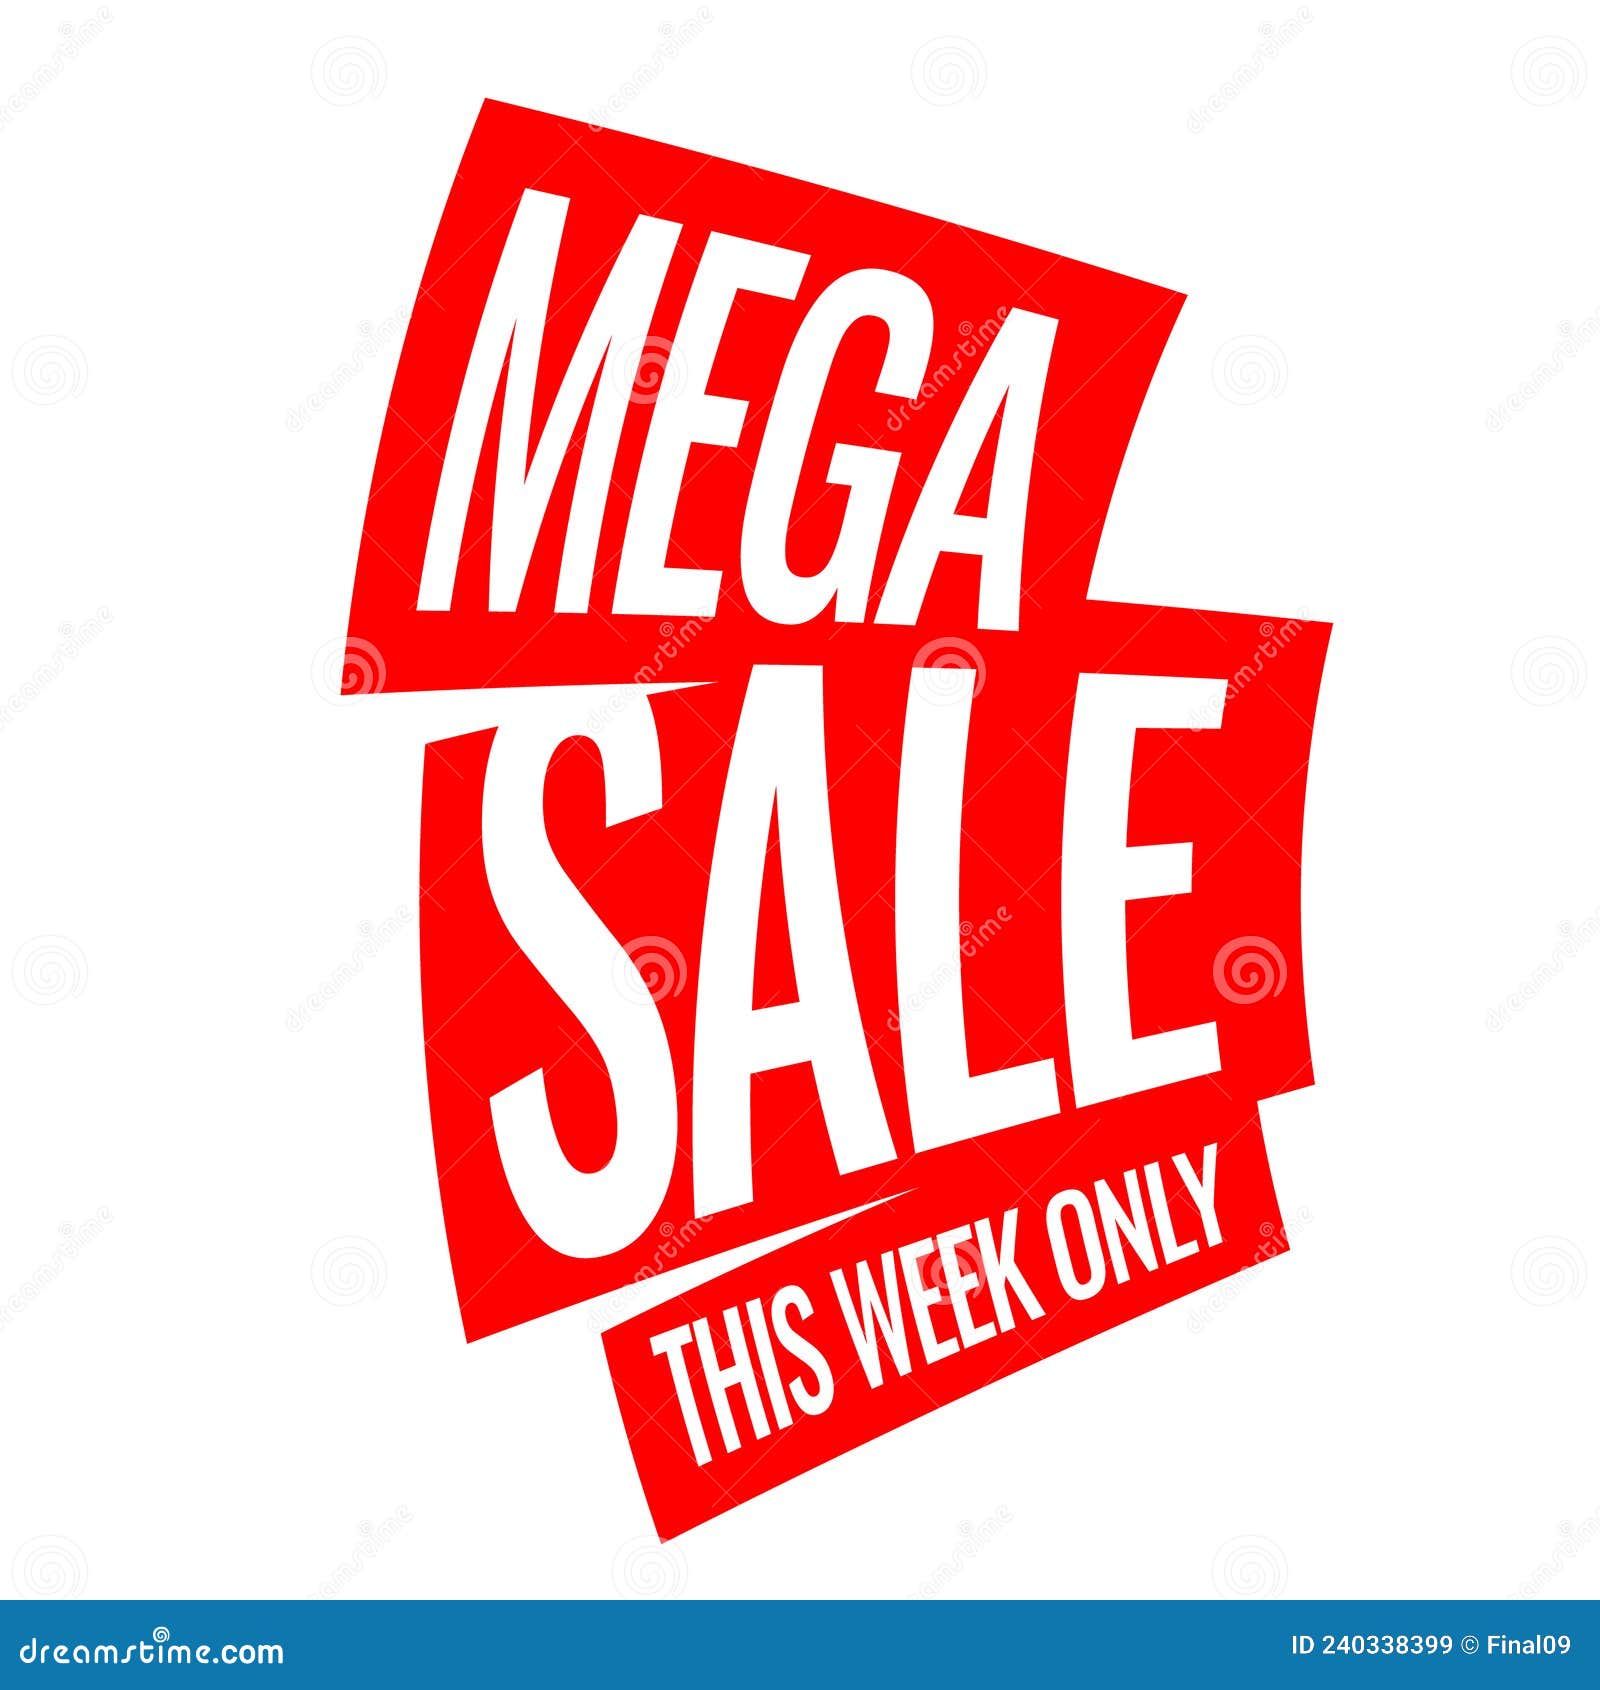 mega sale advertising banner. this week only special offer